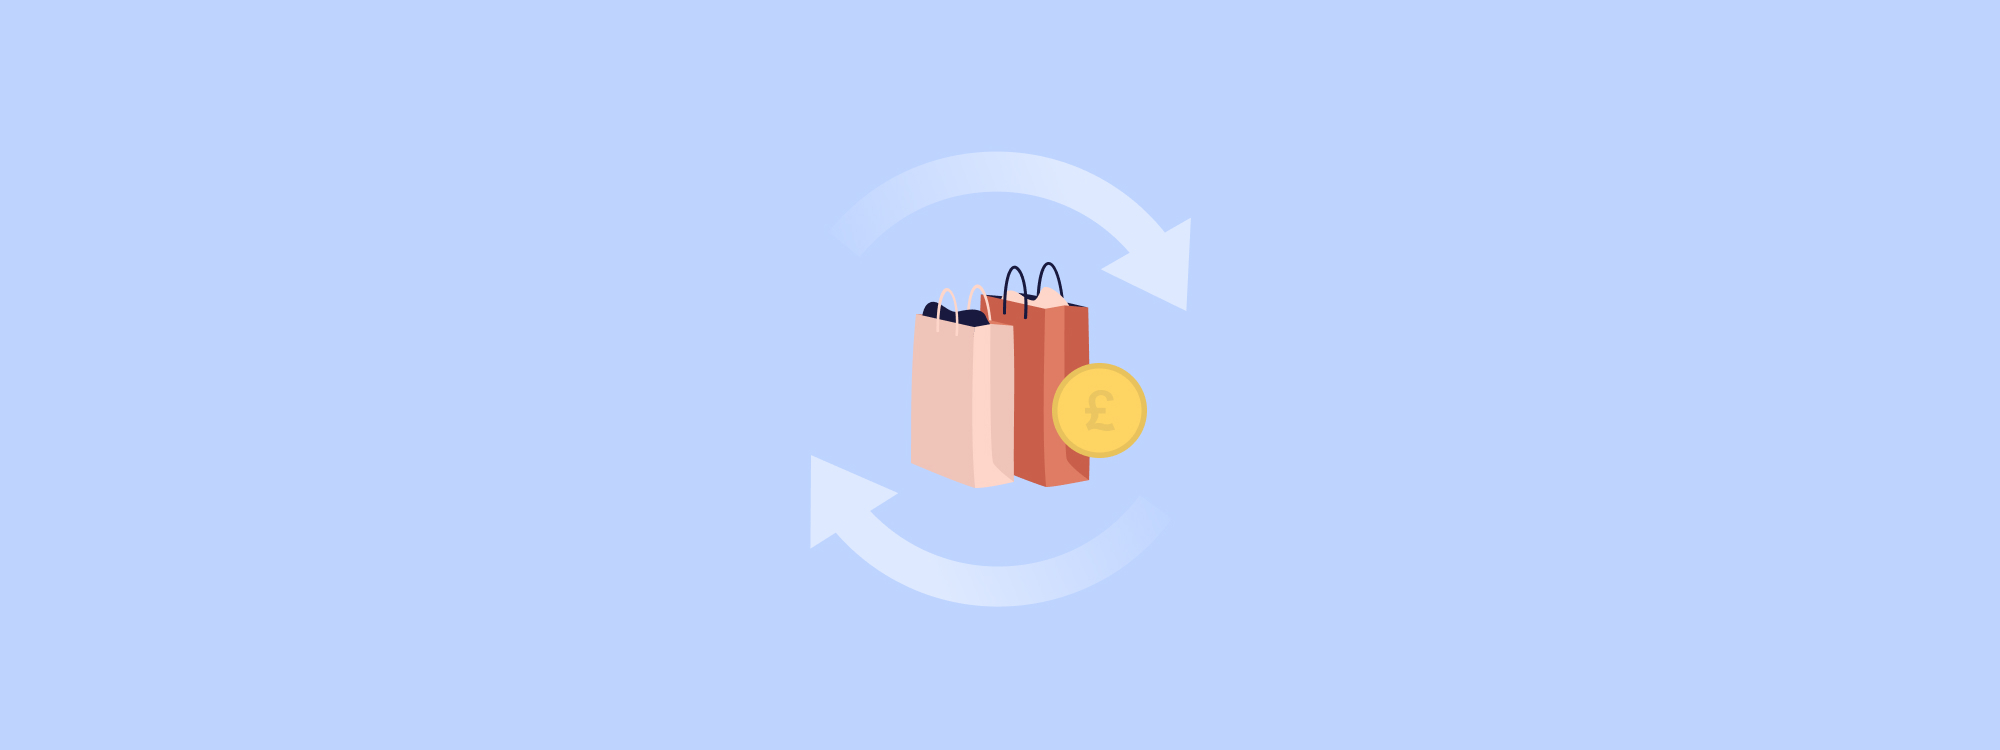 Retail Return Policies: Your Guide to Returns and Free Shipping